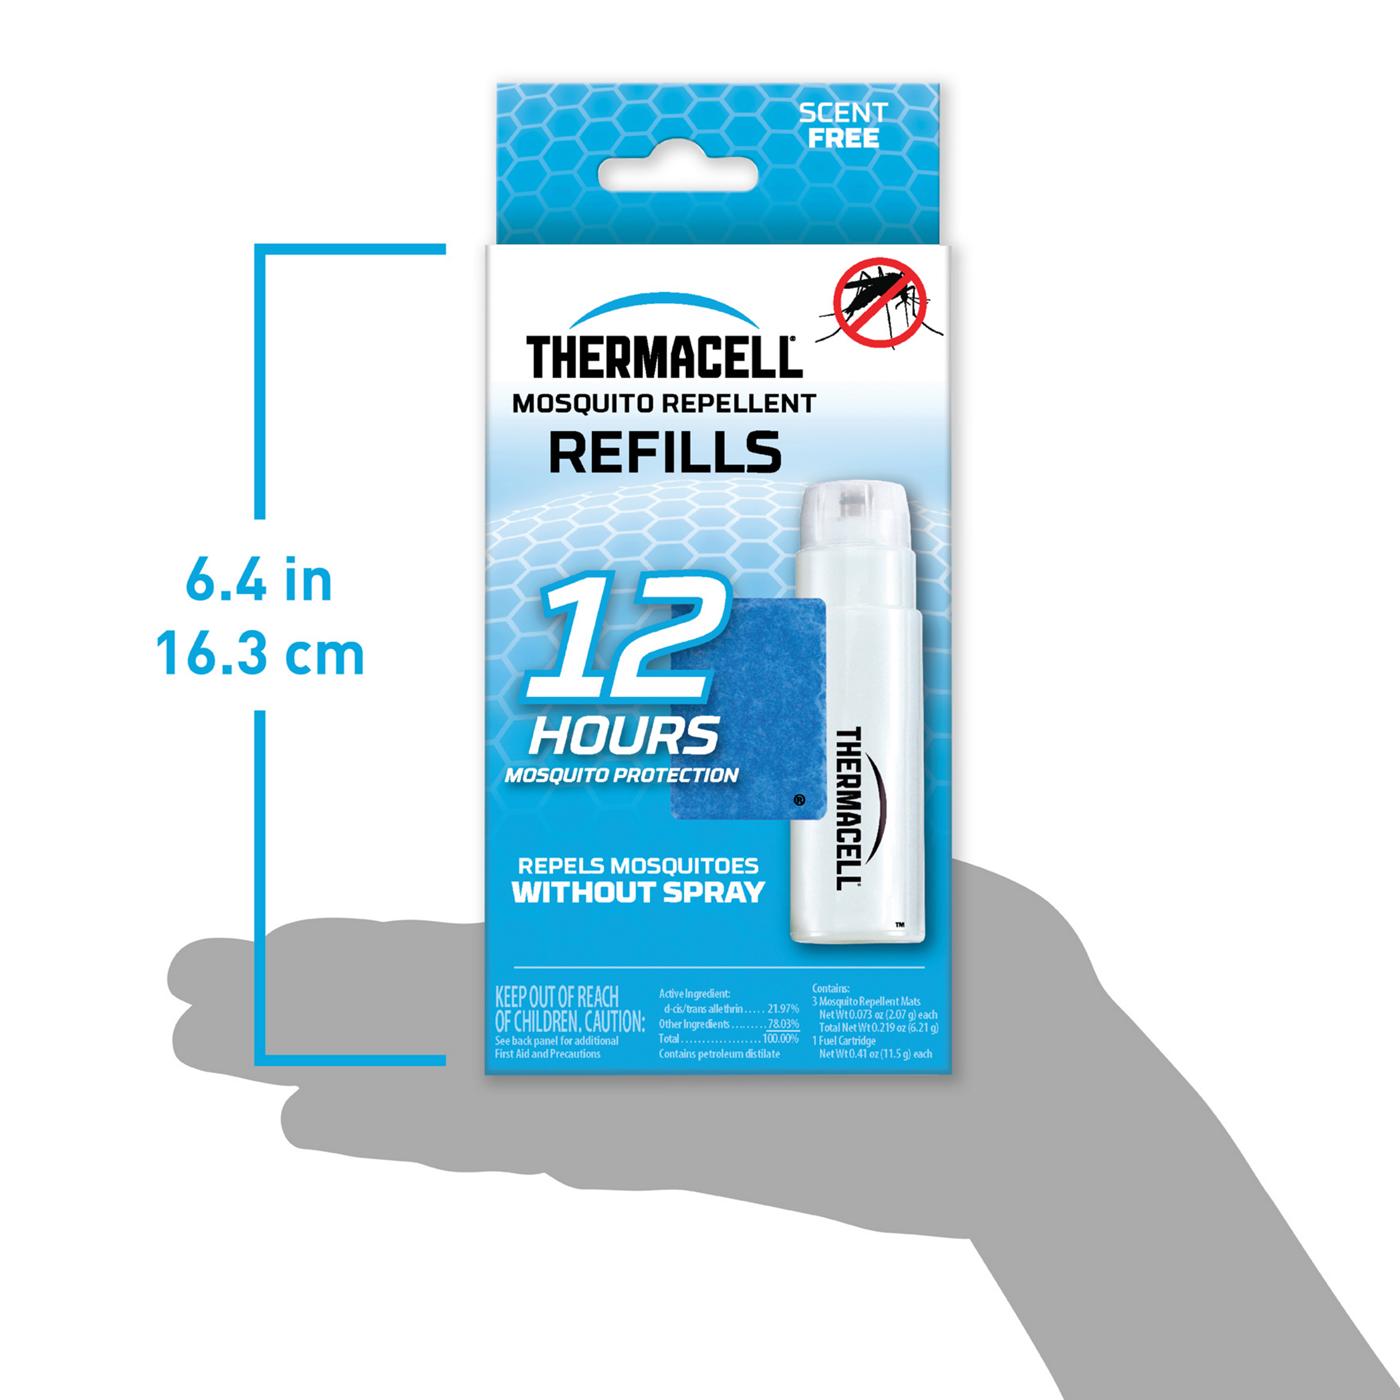 Thermacell 12HR Mosquito Repellent Refills - Scent Free; image 4 of 5